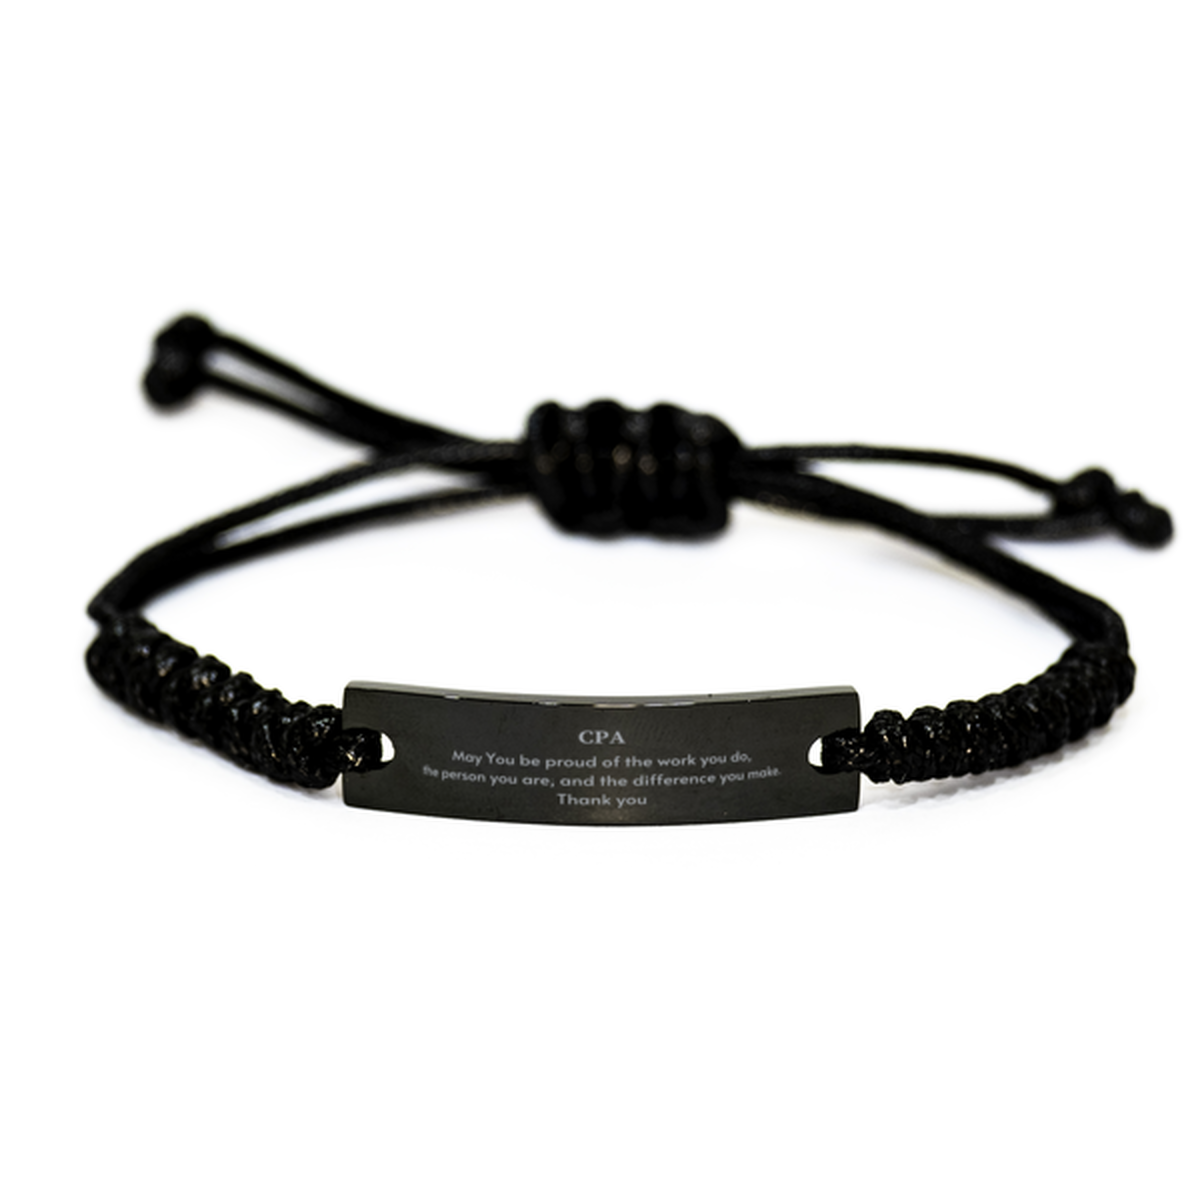 Heartwarming Black Rope Bracelet Retirement Coworkers Gifts for CPA, CPA May You be proud of the work you do, the person you are Gifts for Boss Men Women Friends